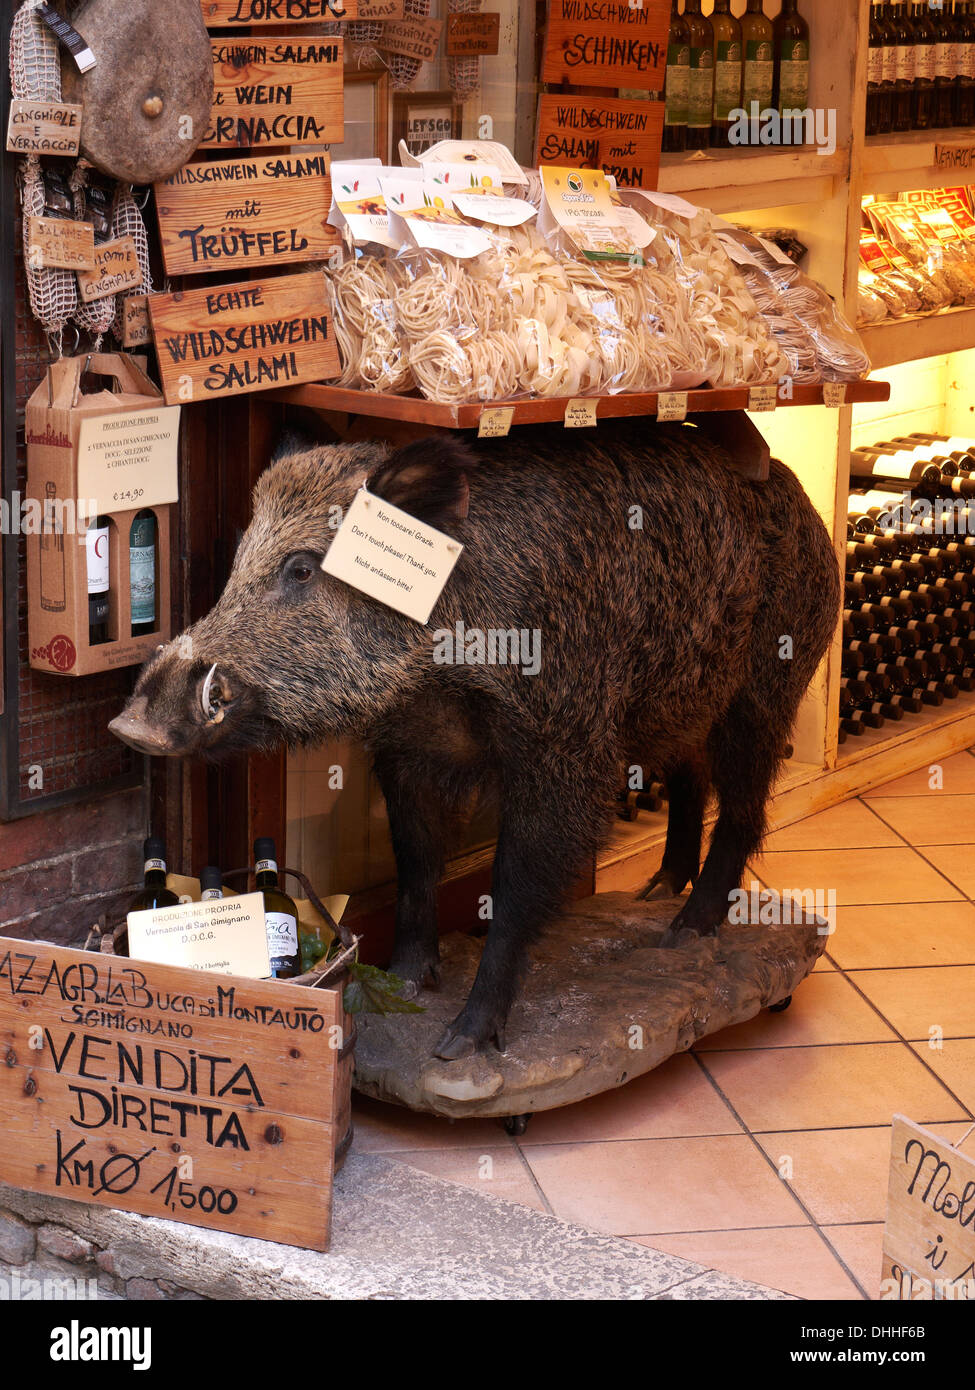 A Shop selling local specialities in San GimignanoTuscany Italy including wines cheeses and local meats. Decorated with a stuffed wild boar Stock Photo